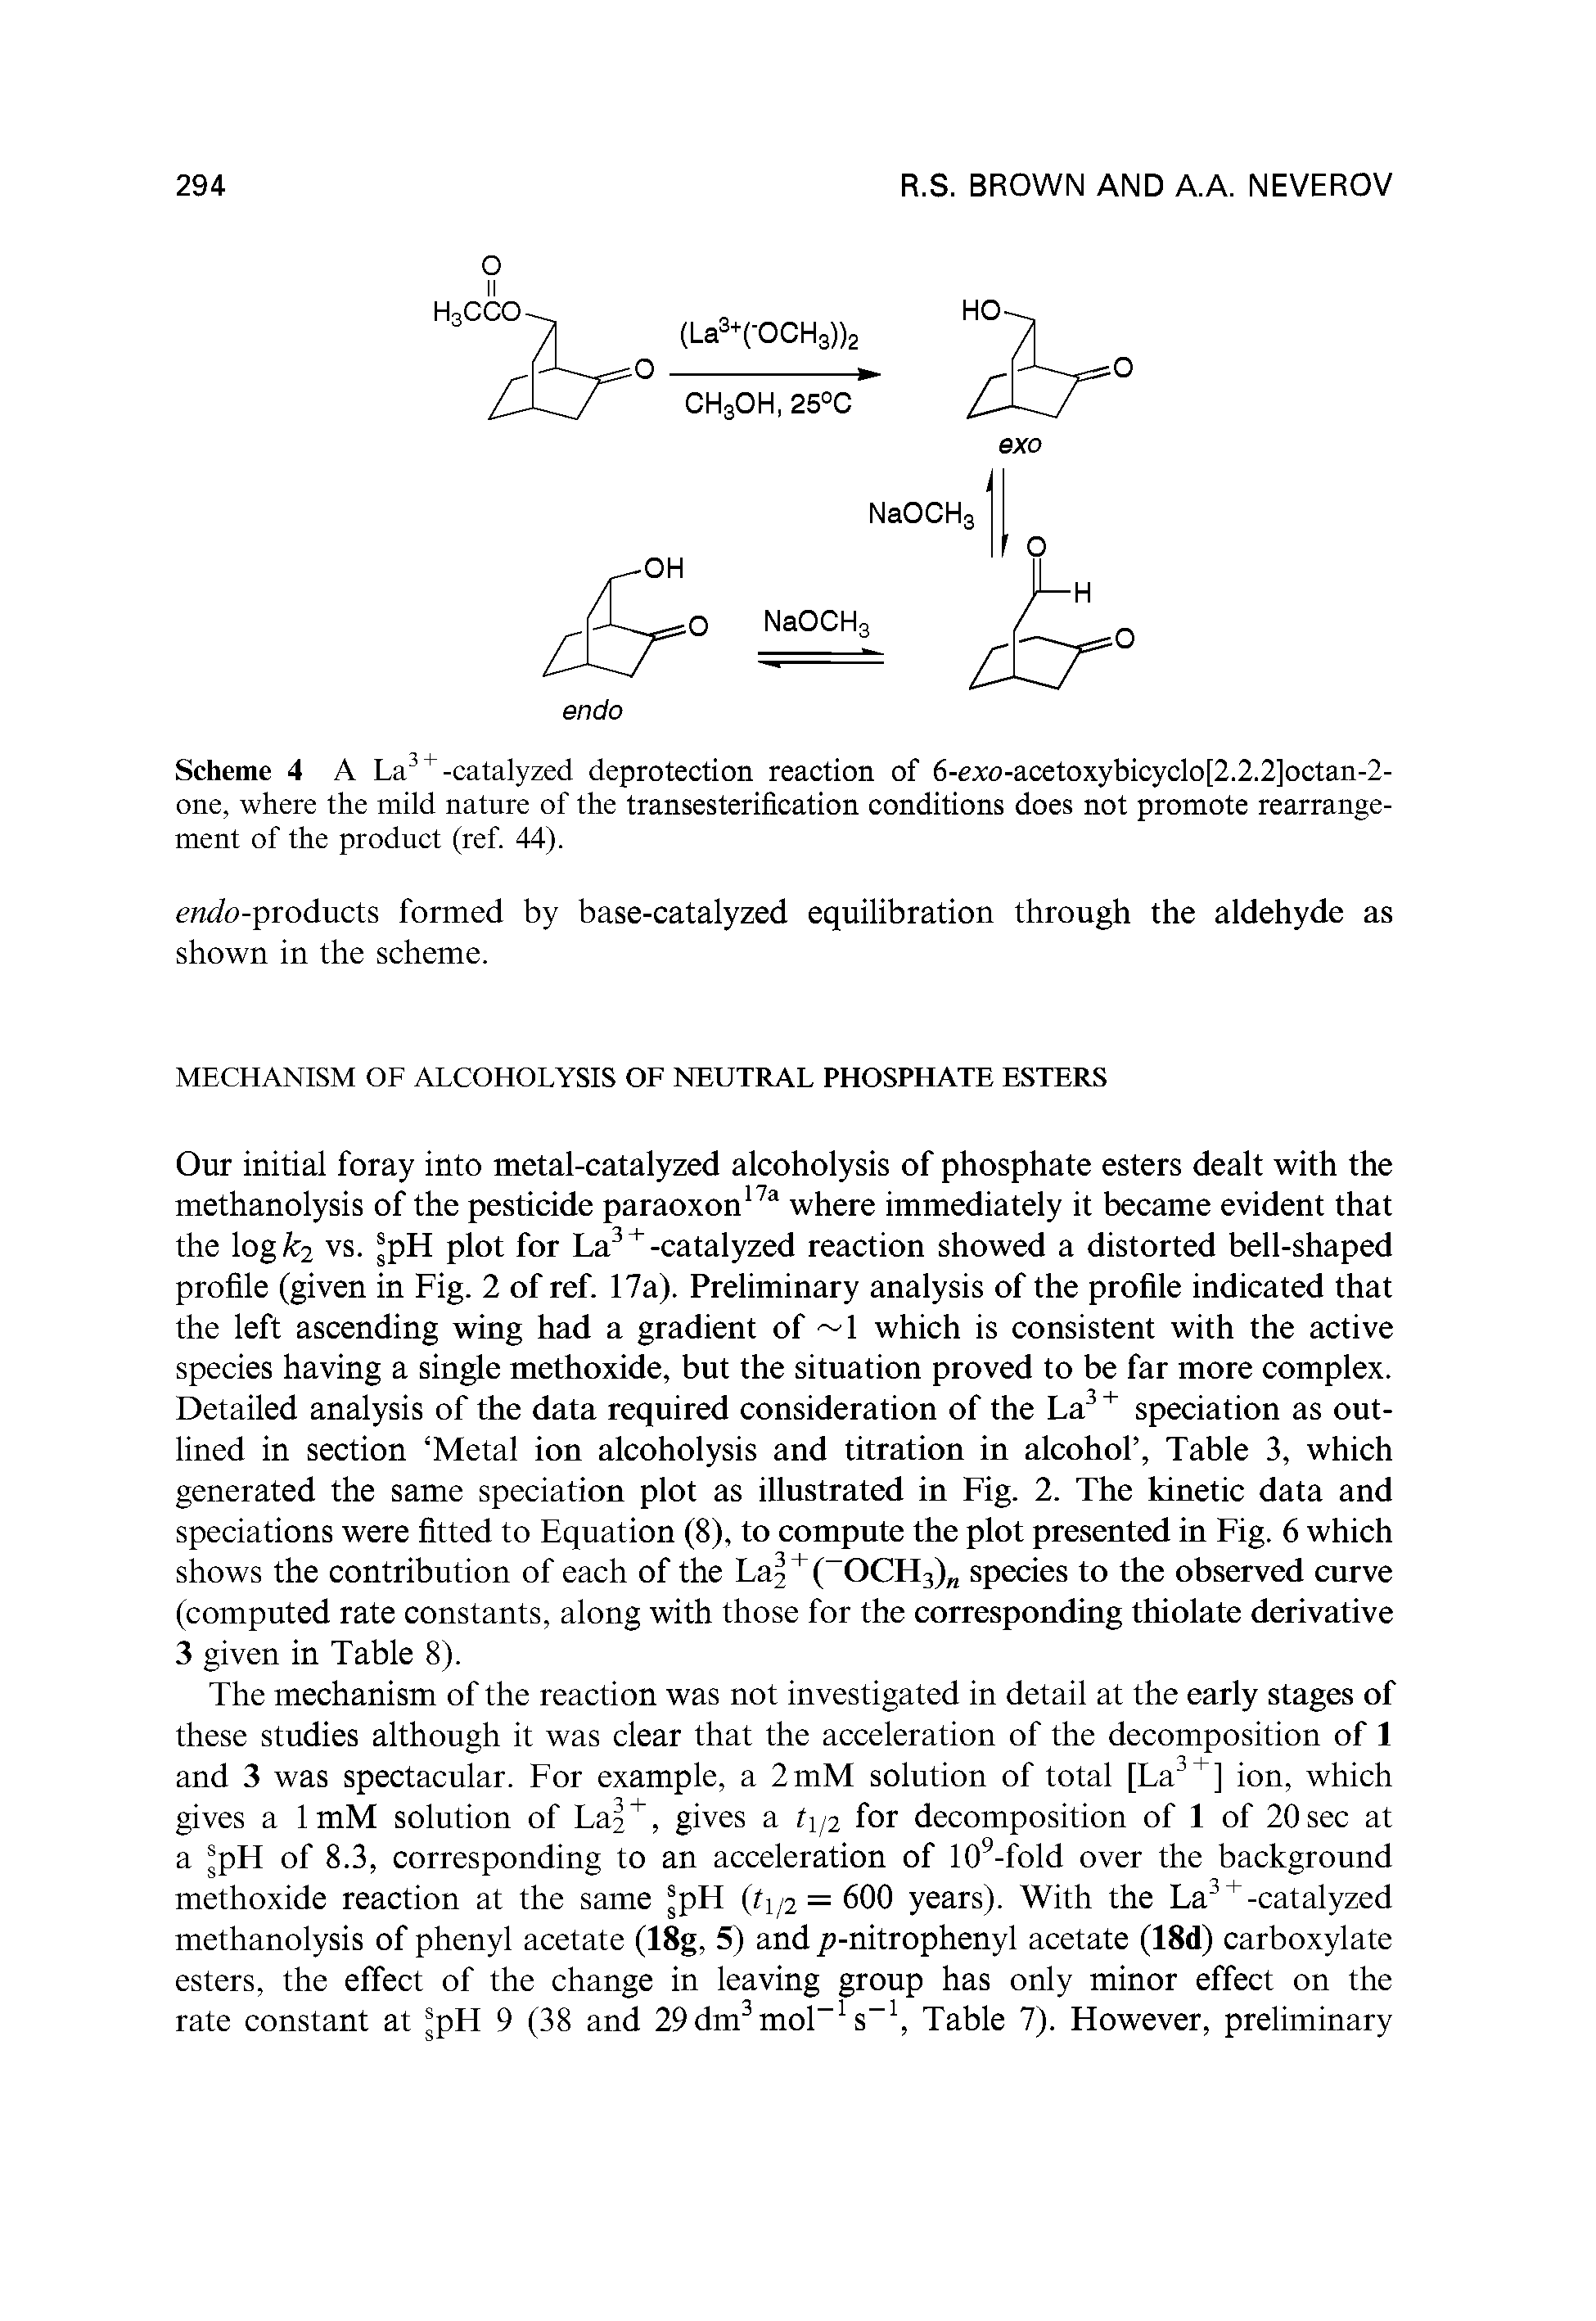 Scheme 4 A La3 +-catalyzed deprotection reaction of 6-exo-acetoxybicyclo[2.2.2]octan-2-one, where the mild nature of the transesterification conditions does not promote rearrangement of the product (ref. 44).